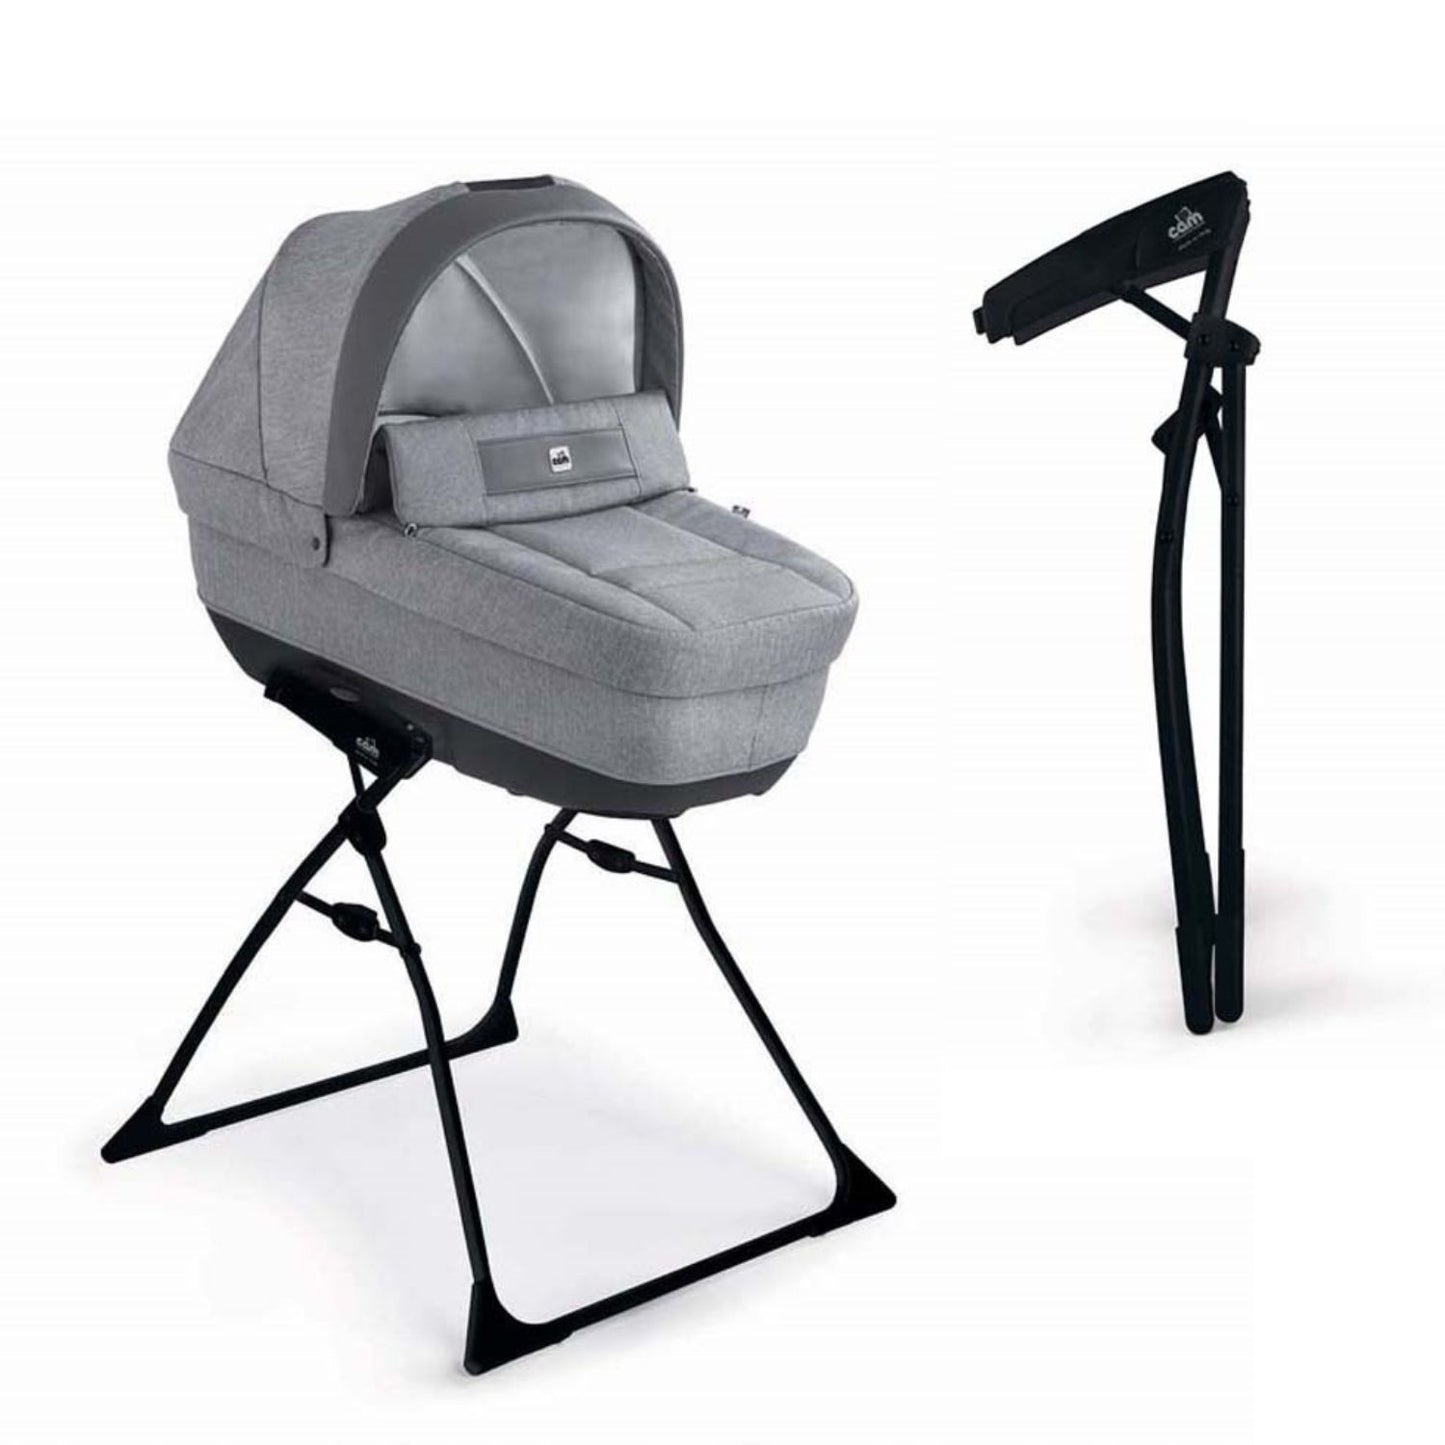 Cam - Booster seat for carrycot and car seat